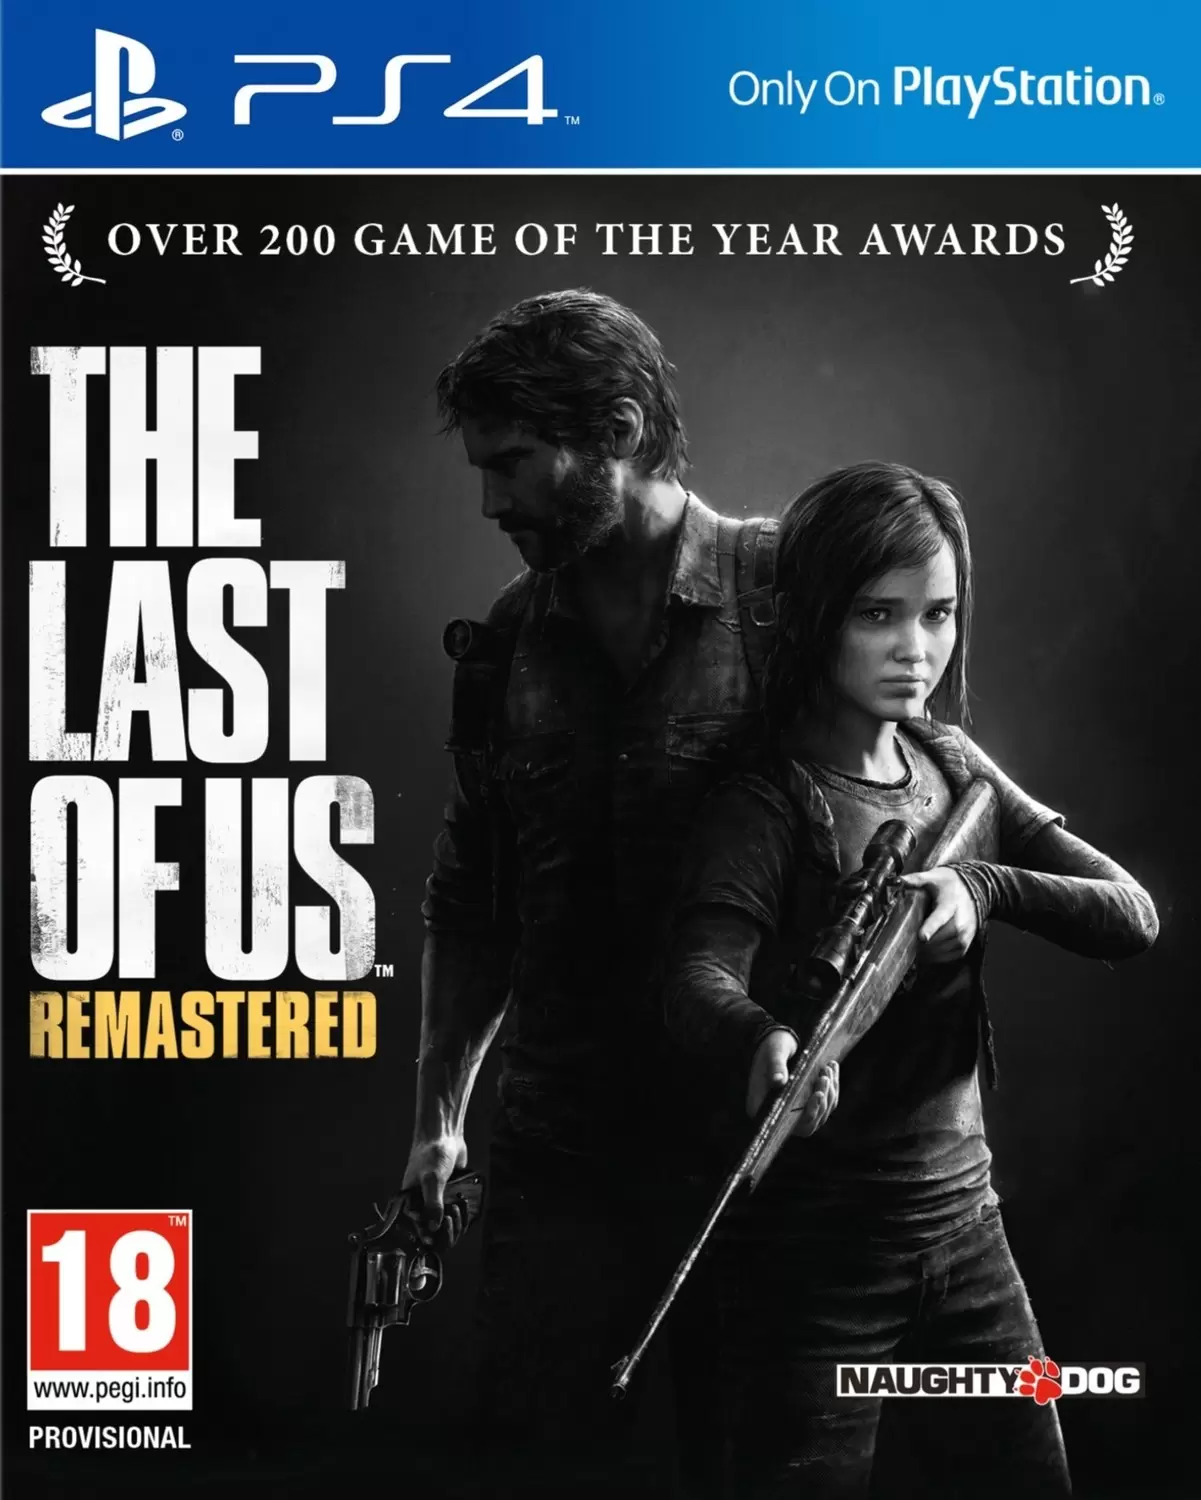 PS4 Games - The Last of Us Remastered